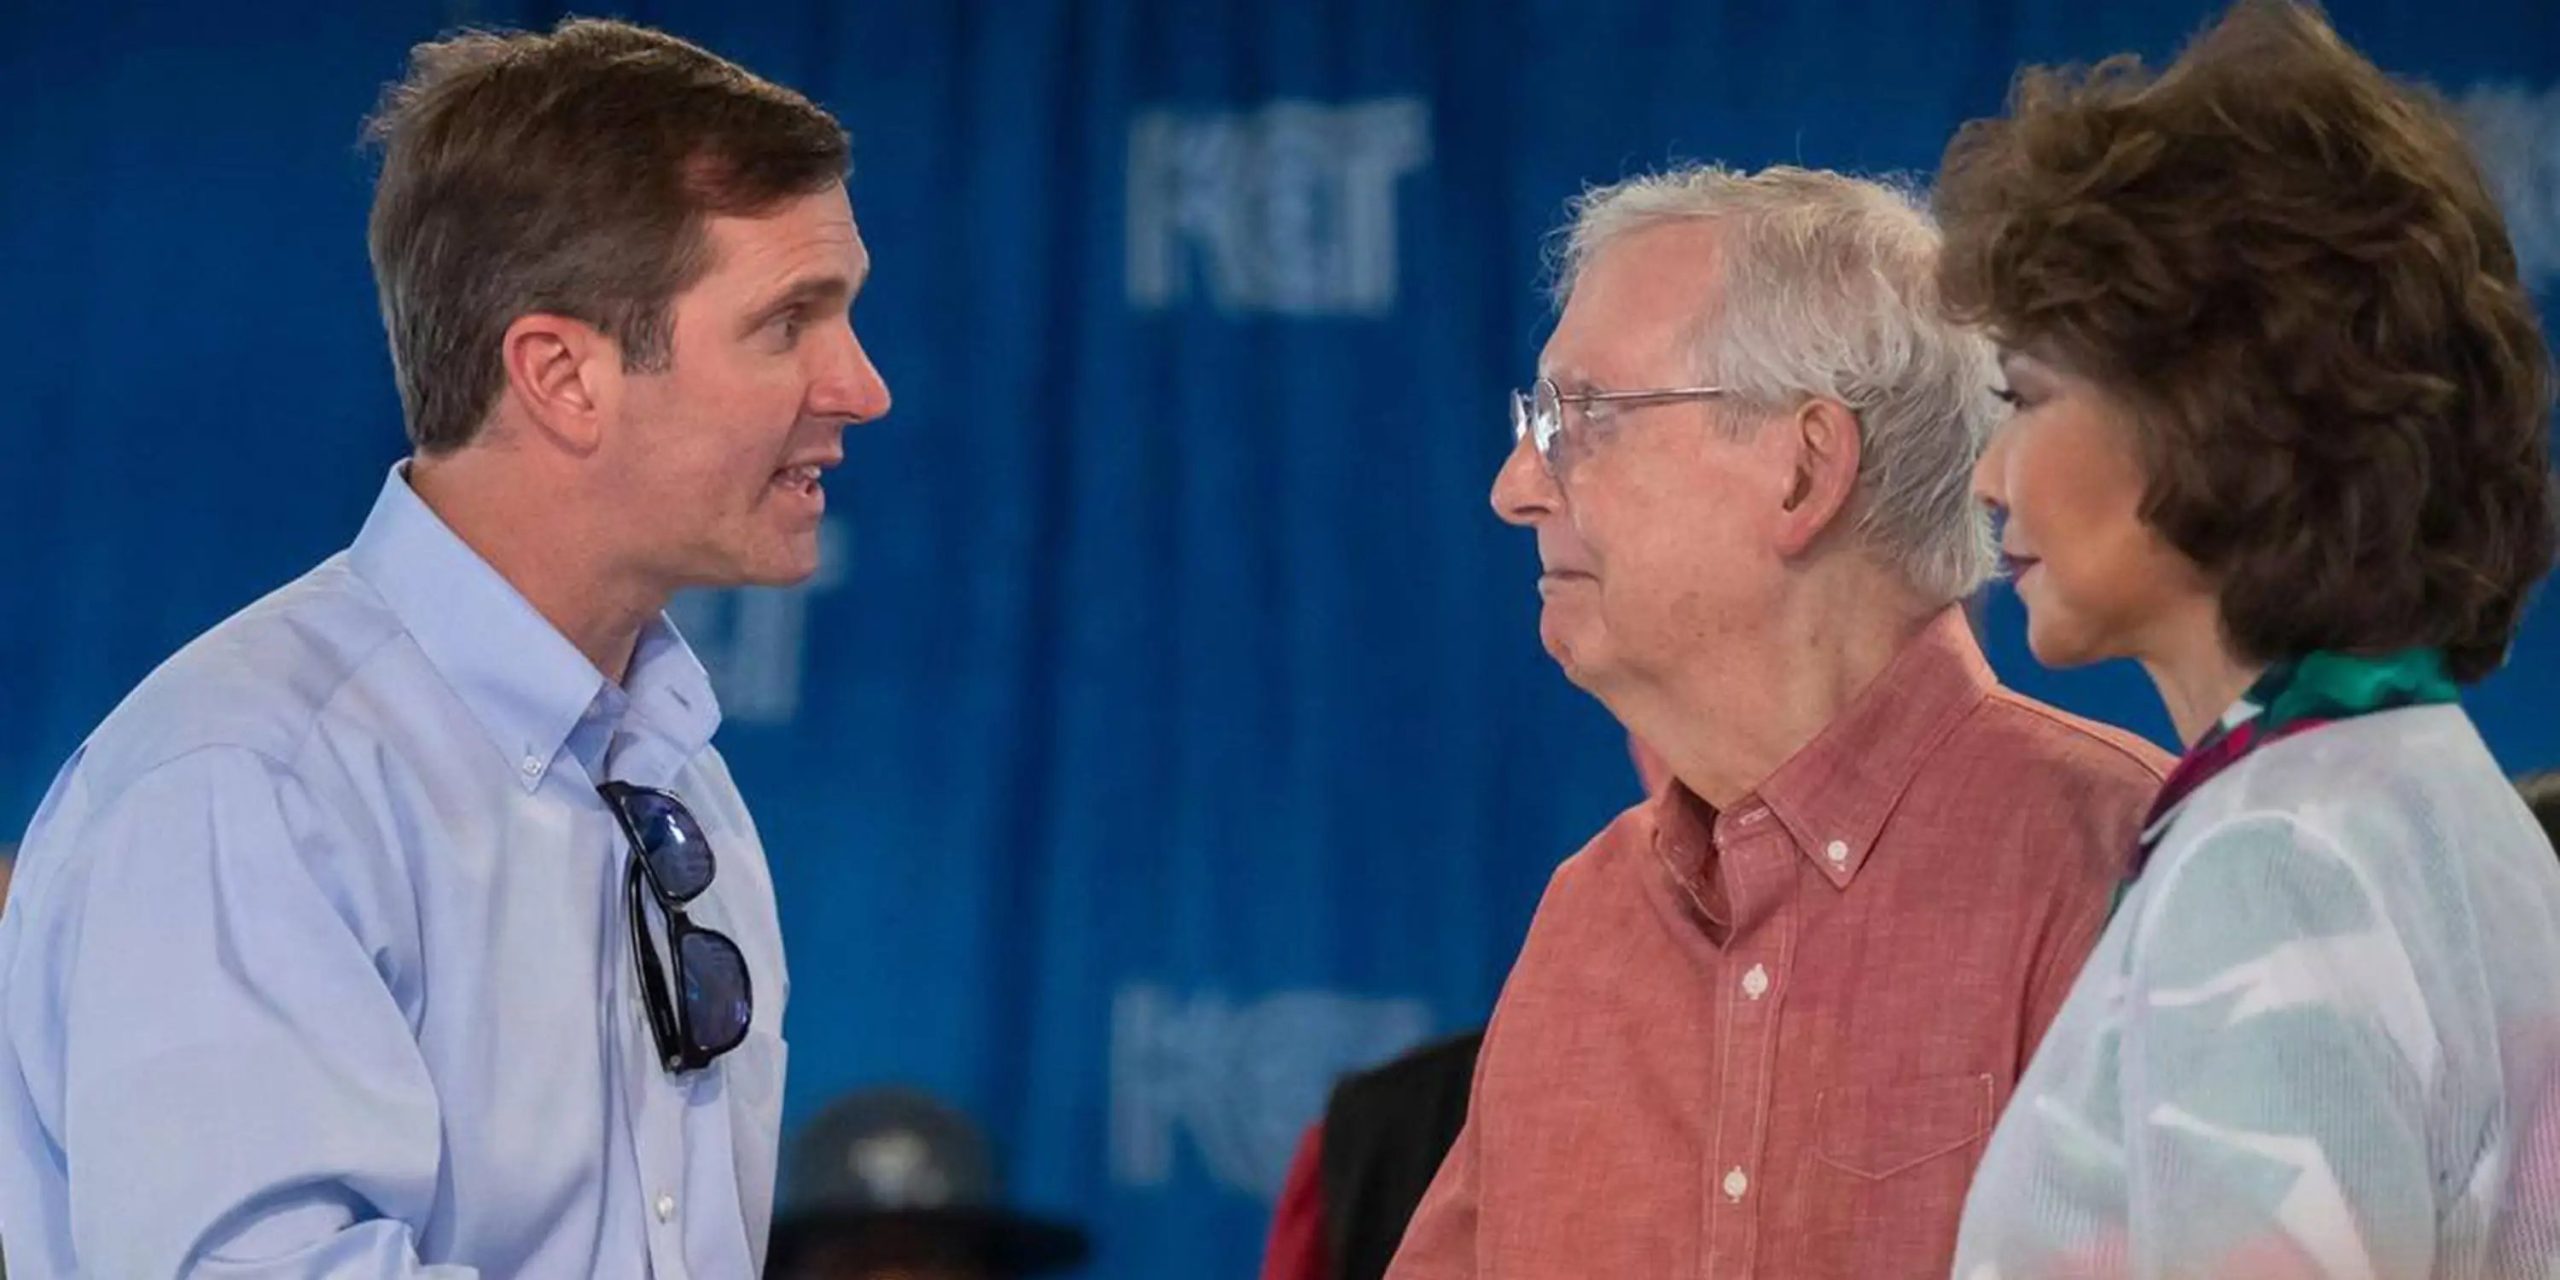 Kentucky Governor Andy Beshear would not say whether he would follow the state’s new Senate vacancy law and appoint another Republican if McConnell leaves.